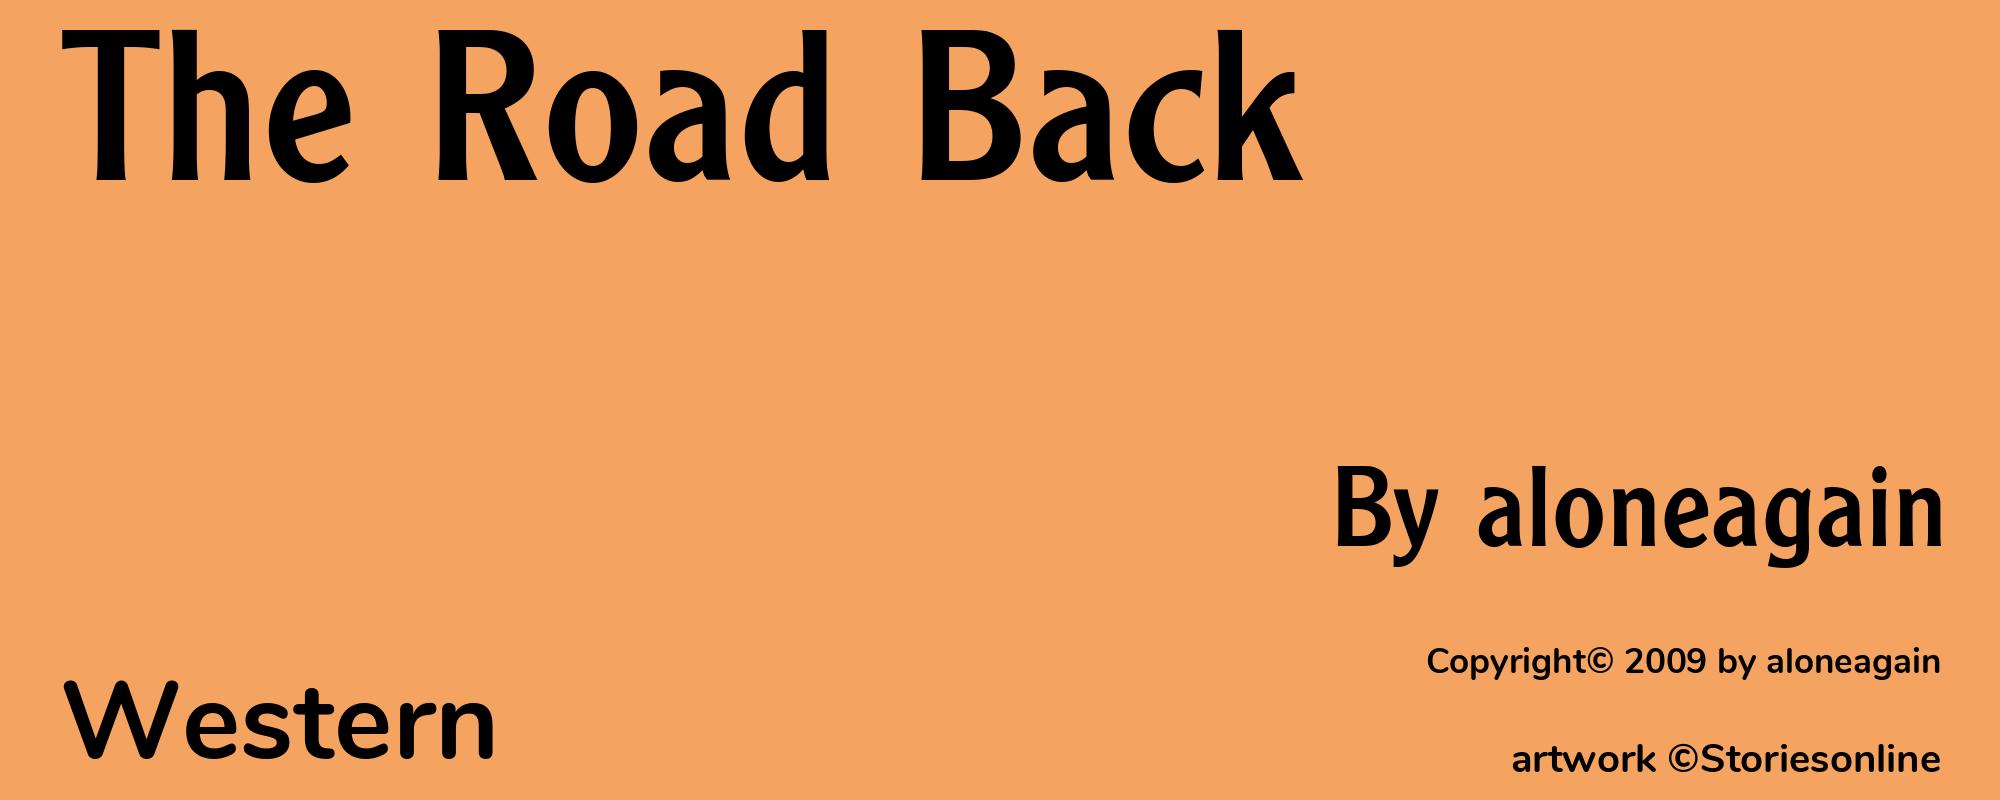 The Road Back - Cover